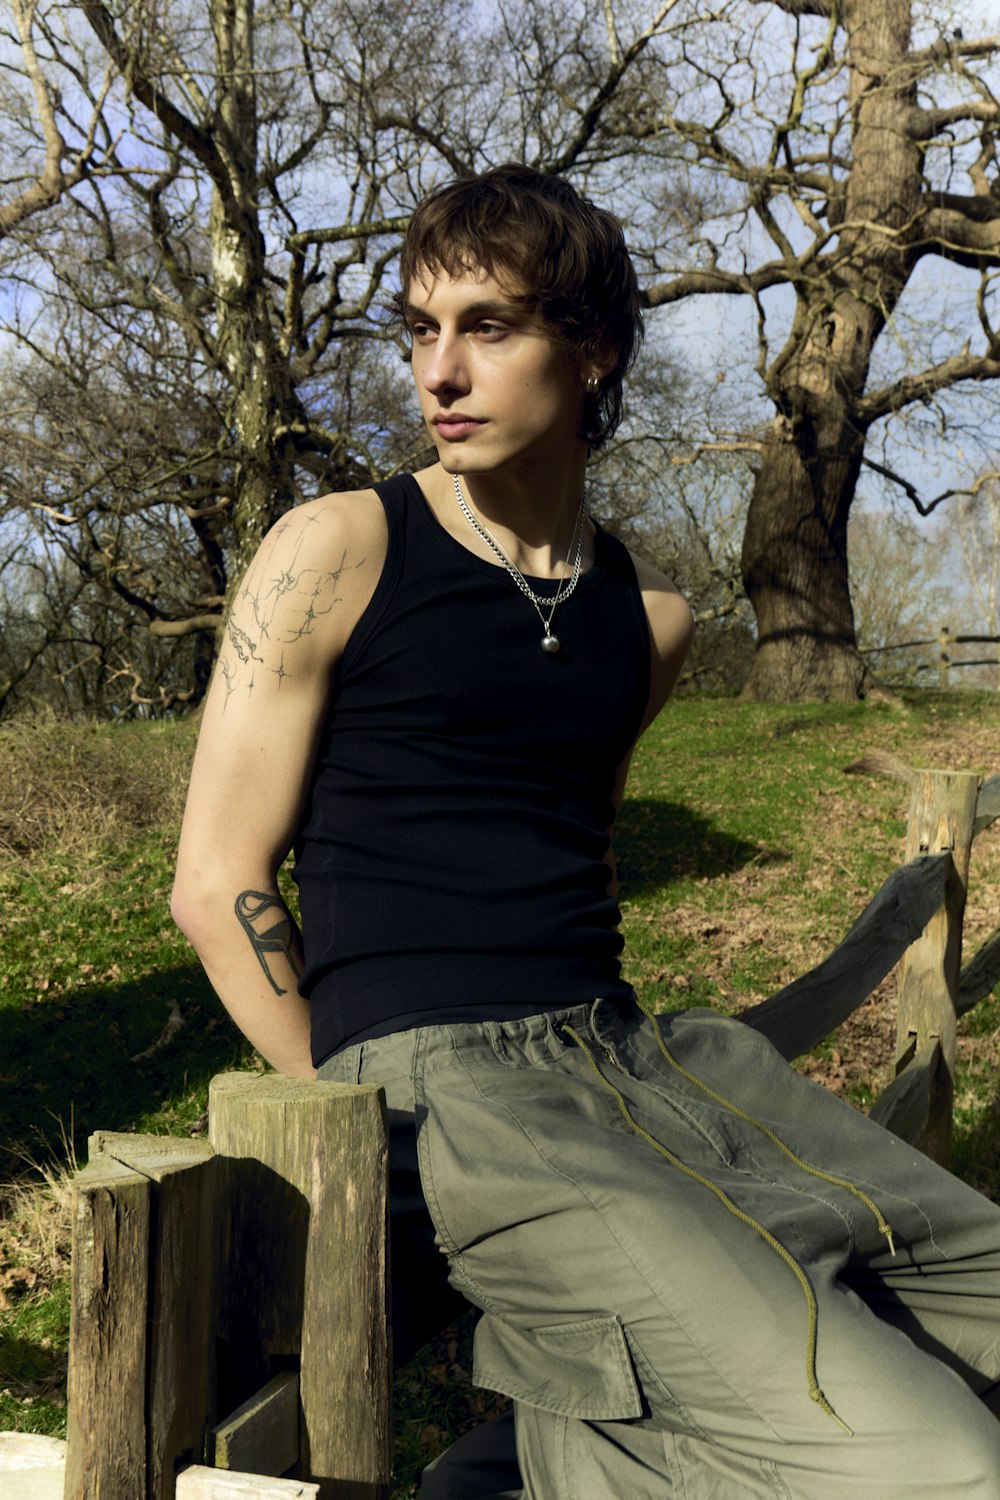 a man with tattoos sitting on a wooden bench